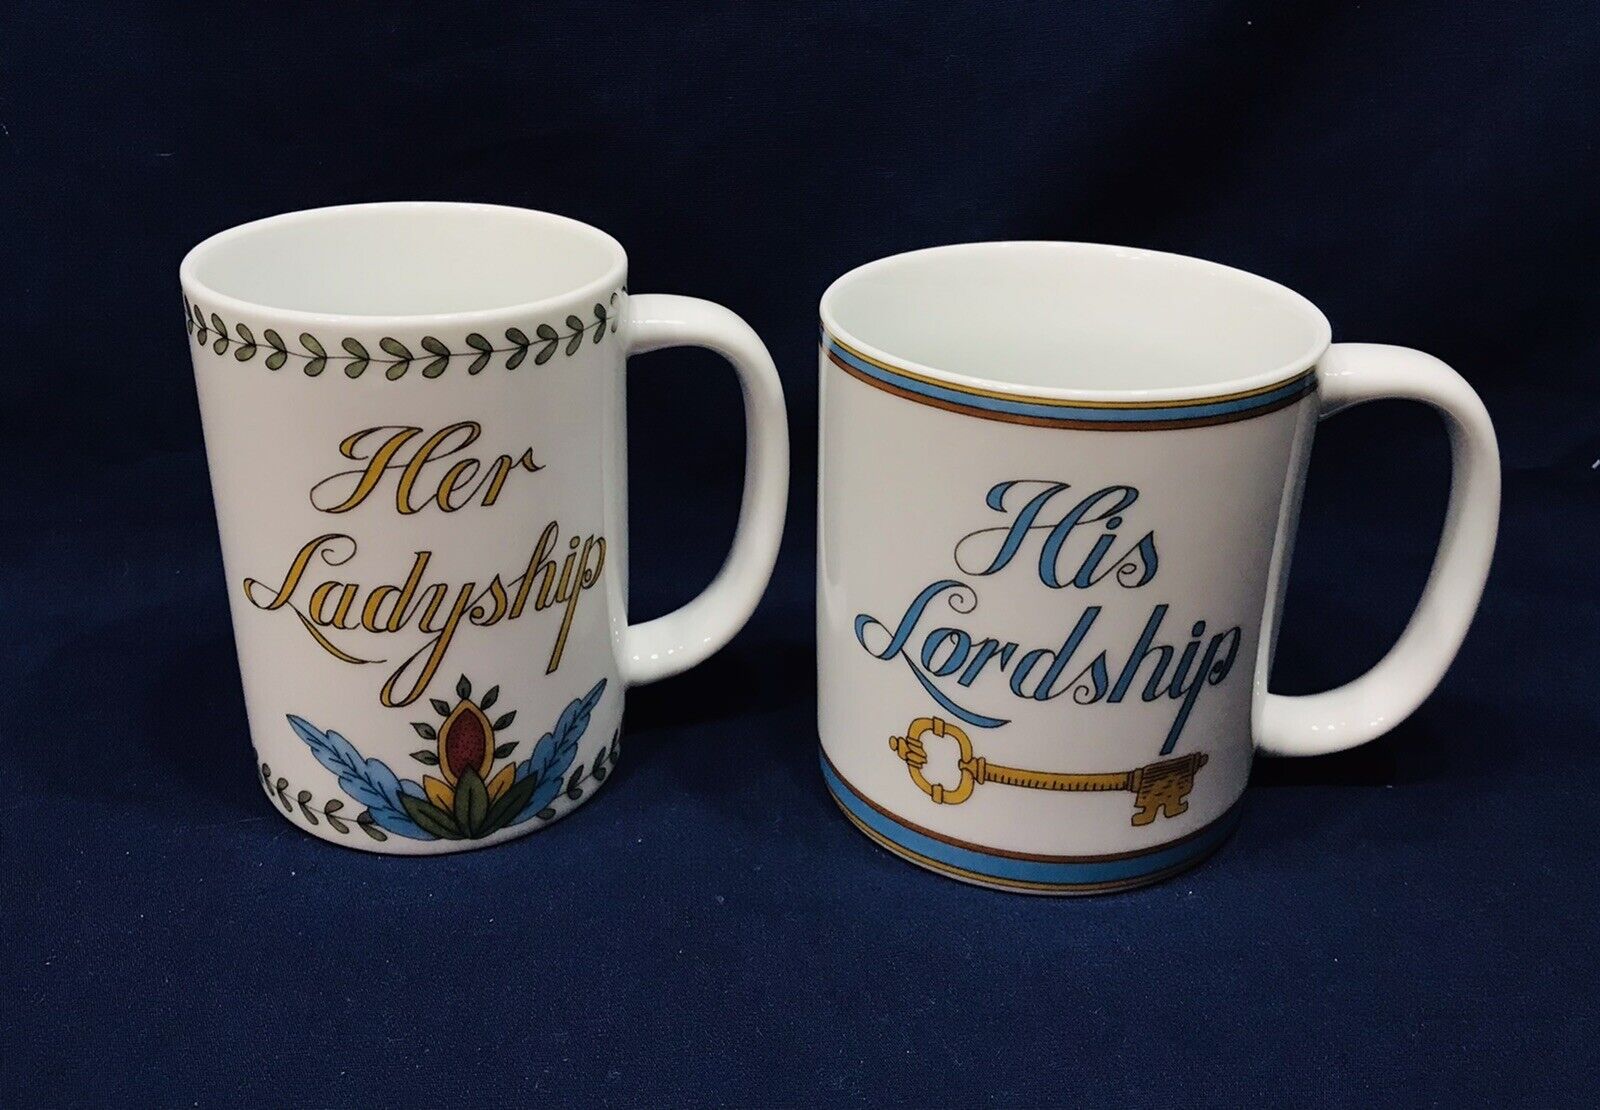 Pair Of Mottahedeh Williamsburg Her Ladyship + His Lordship Coffee Mugs